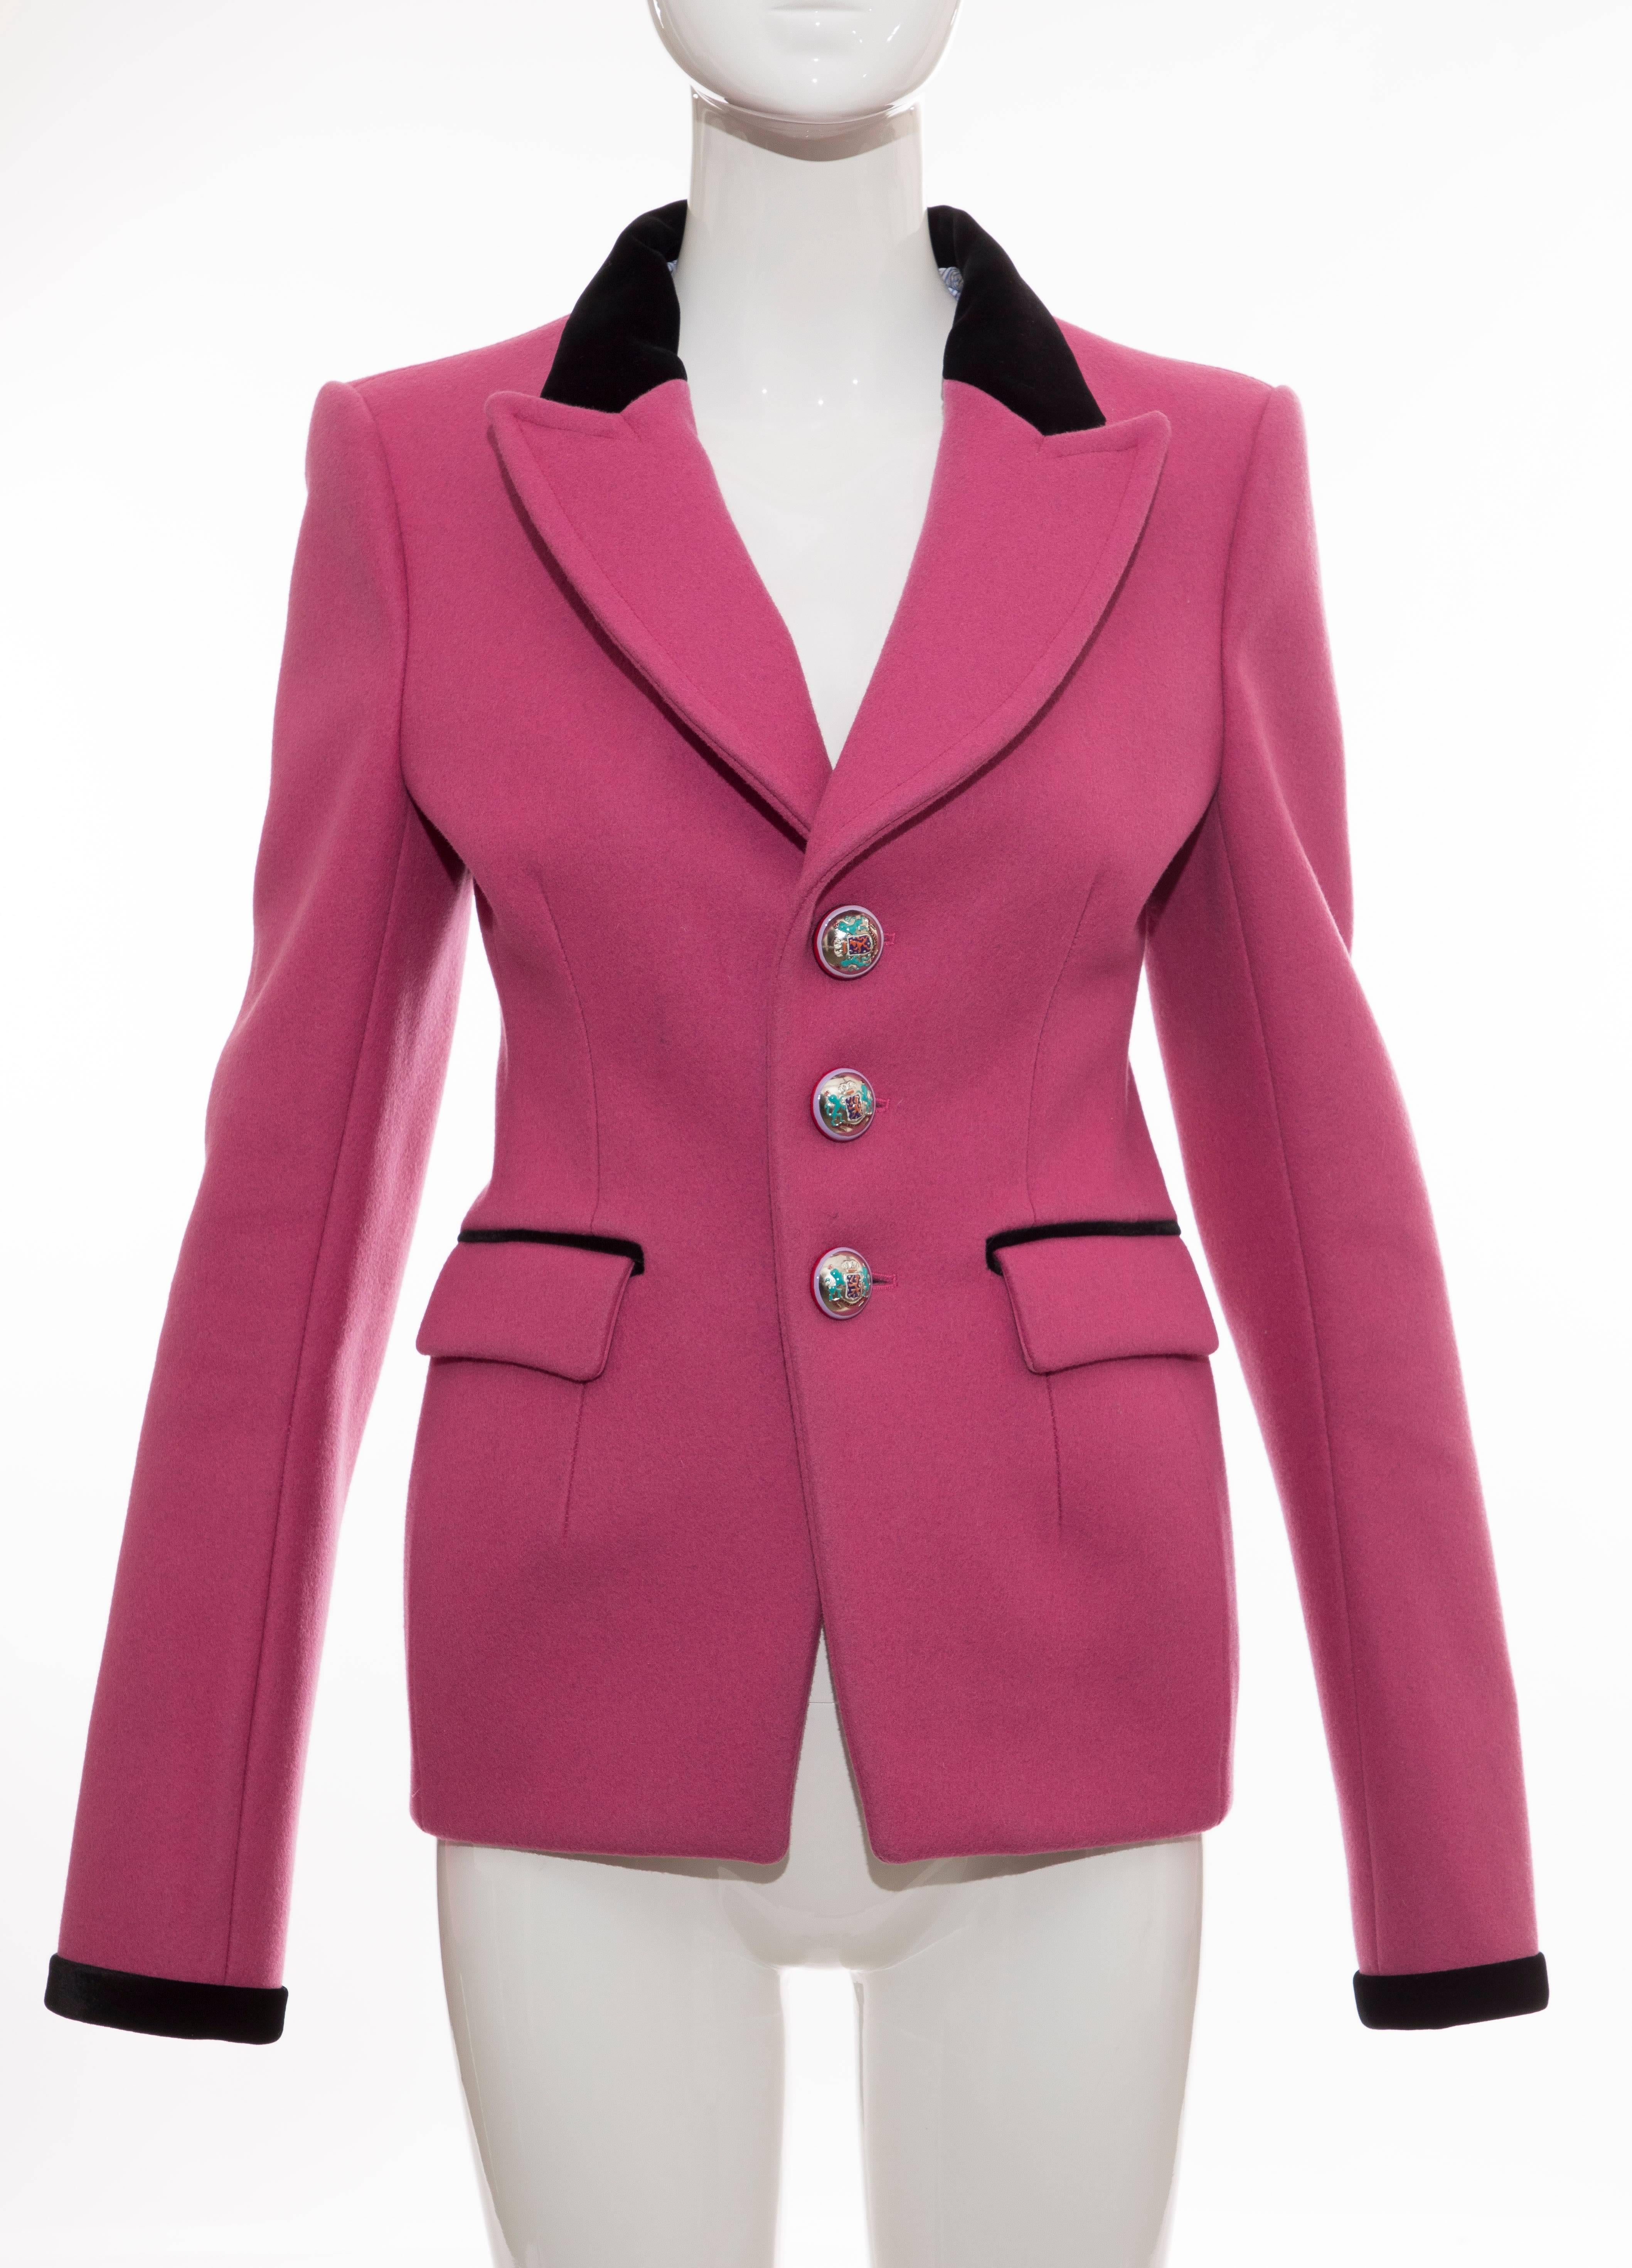 Balenciaga by Nicolas Ghesquière, Autumn-Winter 2007, runway pink structured wool blazer with notched lapel featuring black velvet trim, dual flap pockets at waist, black velvet trim at cuffs and enameled button closures.

FR. 40
US. 8

Bust: 34,